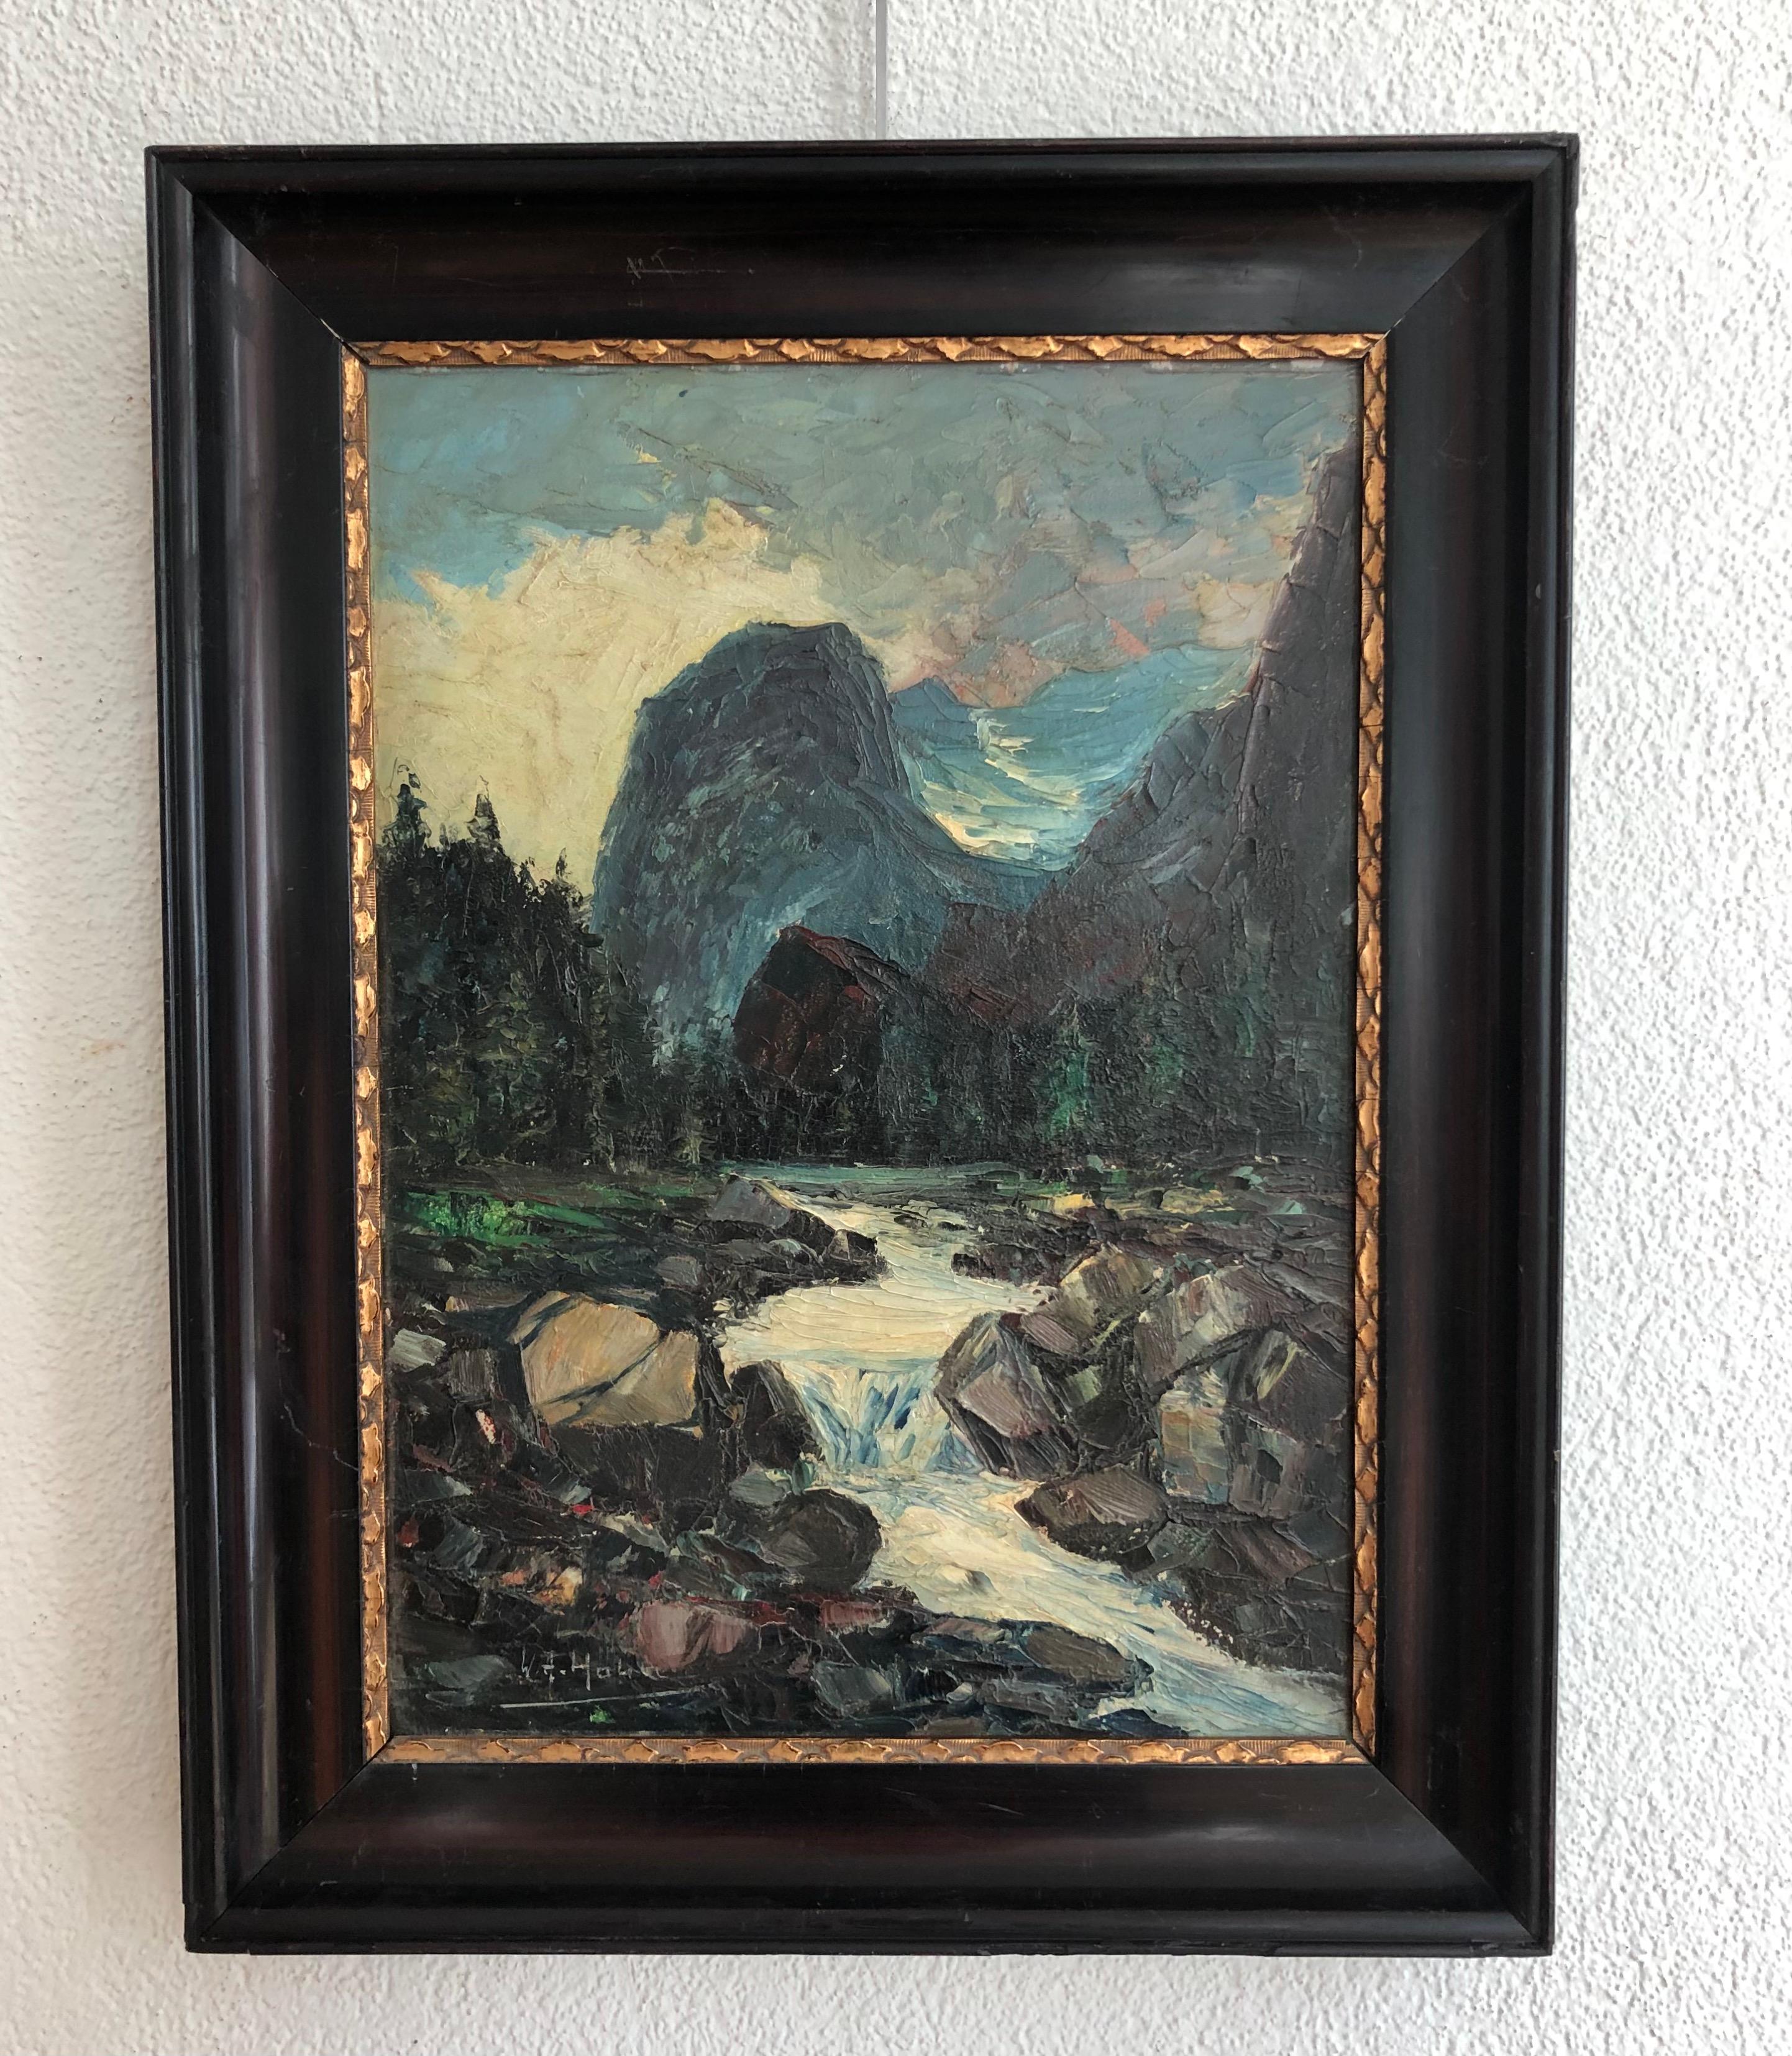 Mountain stream - Painting by W. A. Hahn